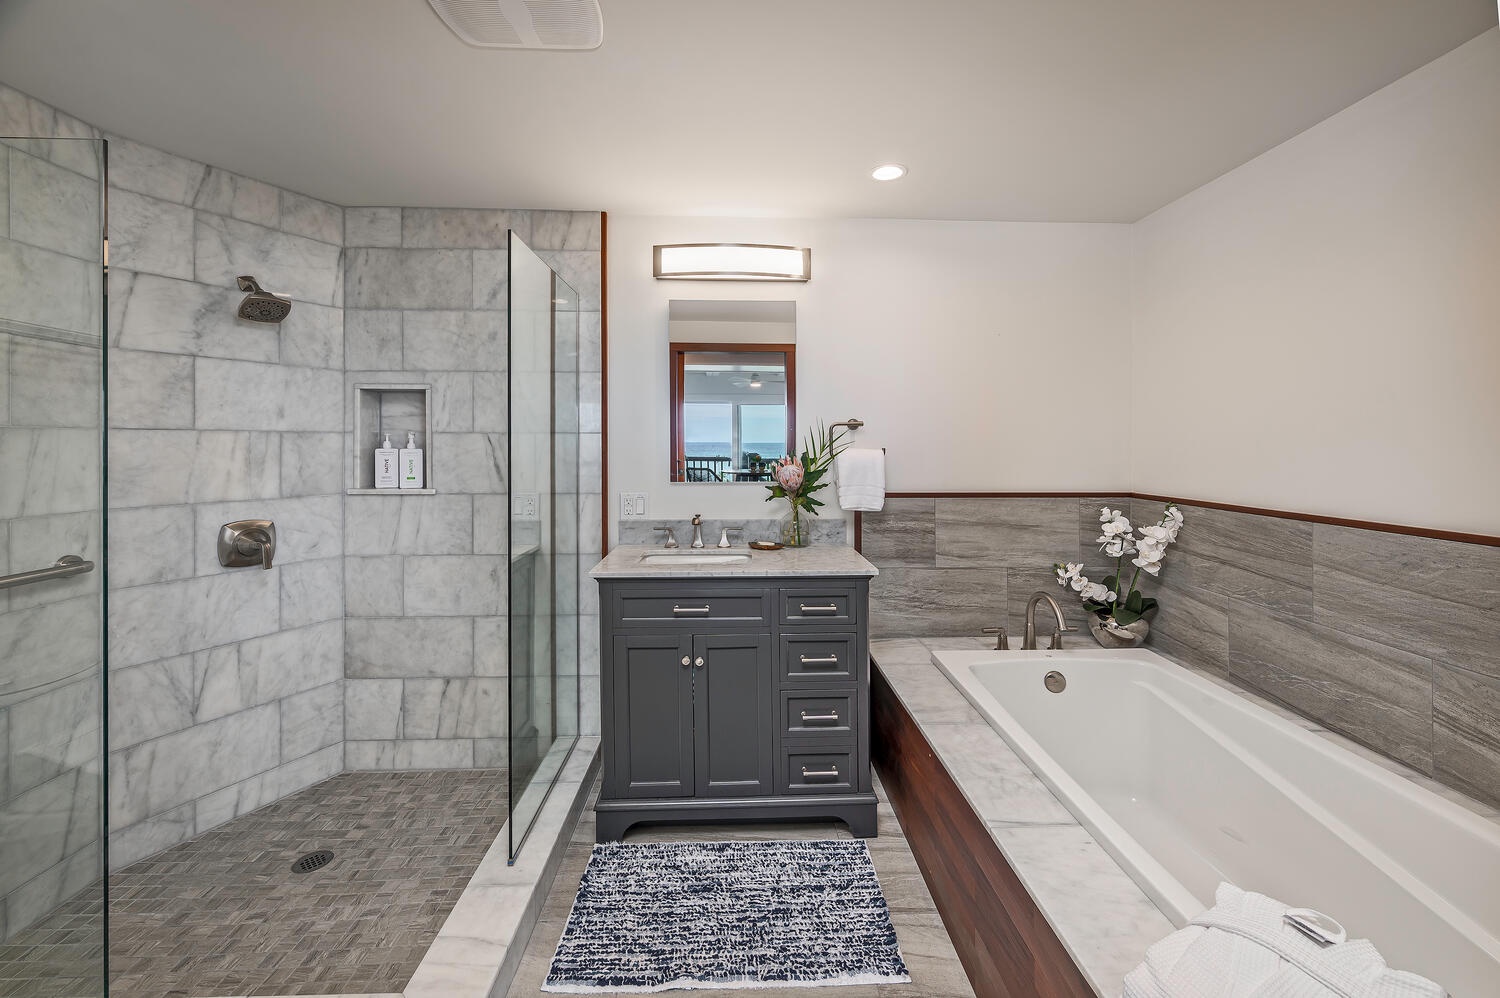 Kailua Vacation Rentals, Hale Lani - Guest bathroom with walk-in shower and soaking tub